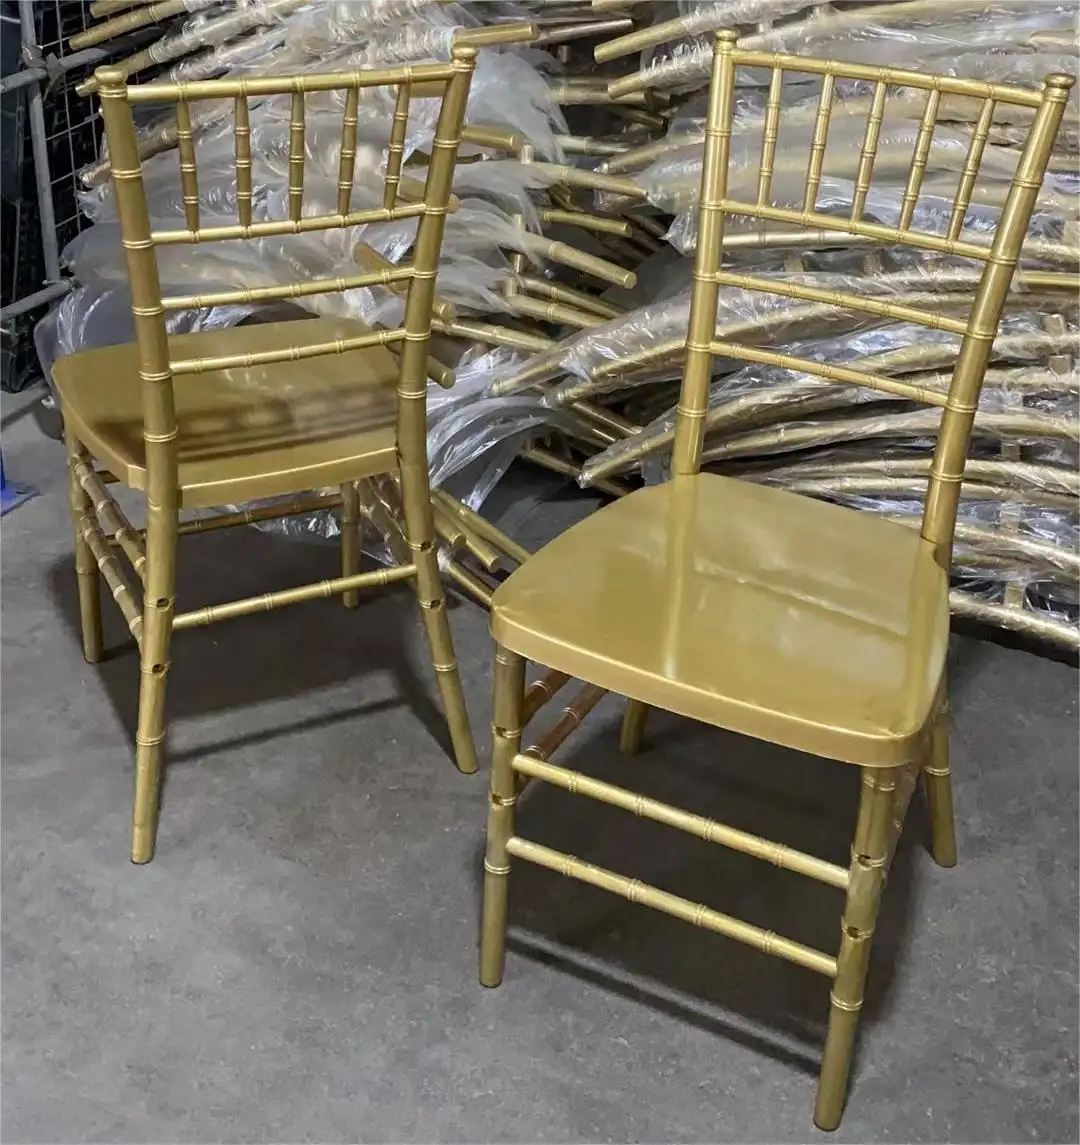 Gold Resin Chiavari Chair Tiffany Style for Outdoor Events such as Weddings Parties in Parks Apartments Villas